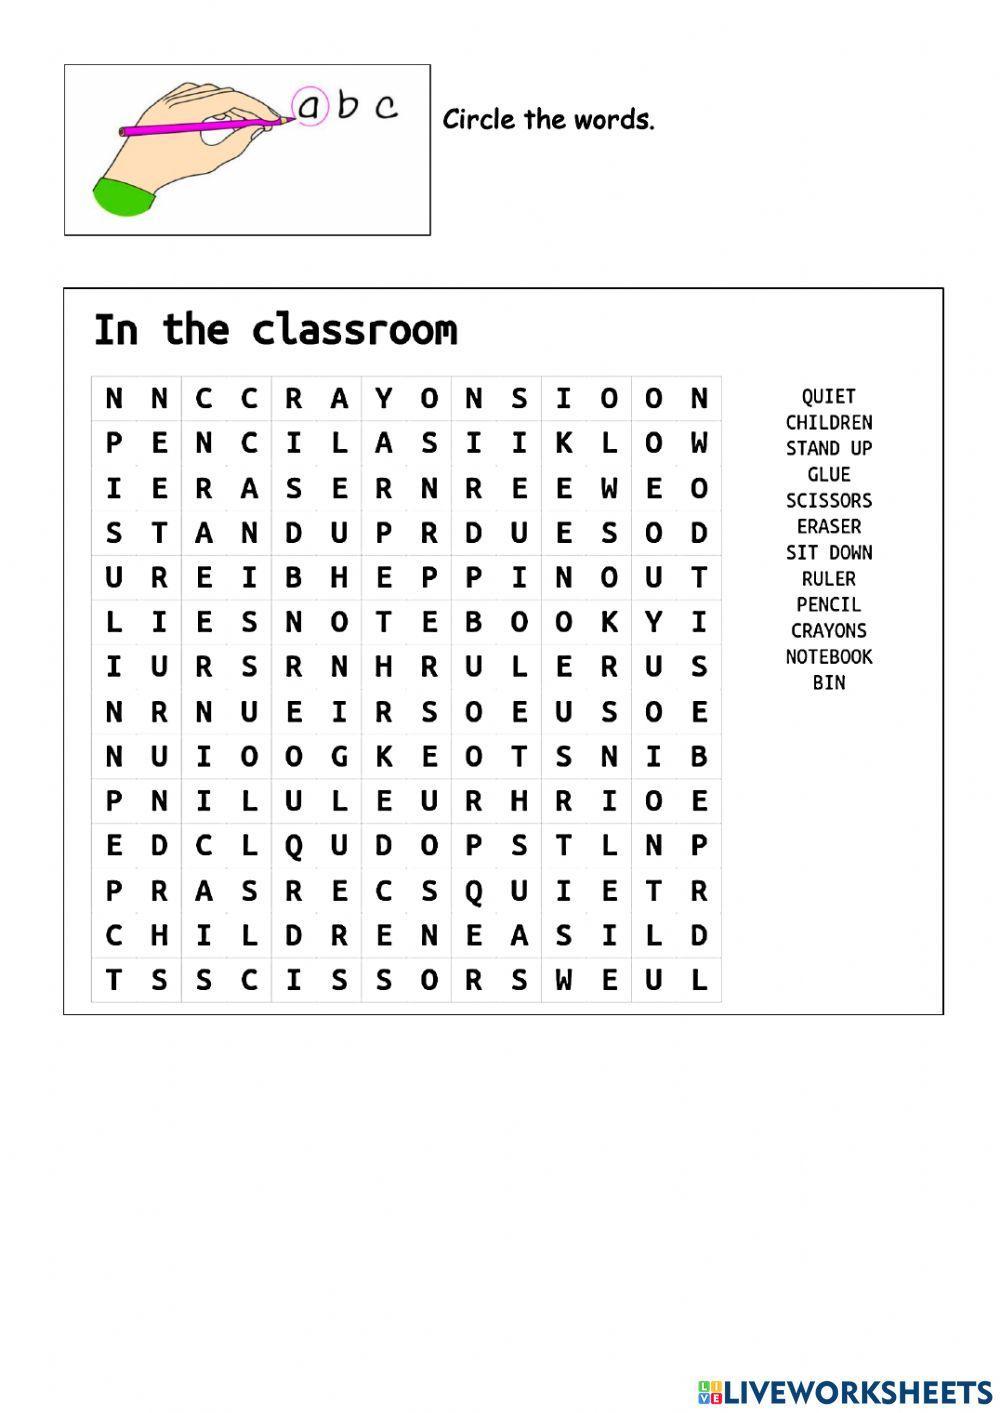 Wordsearch (in the classroom)